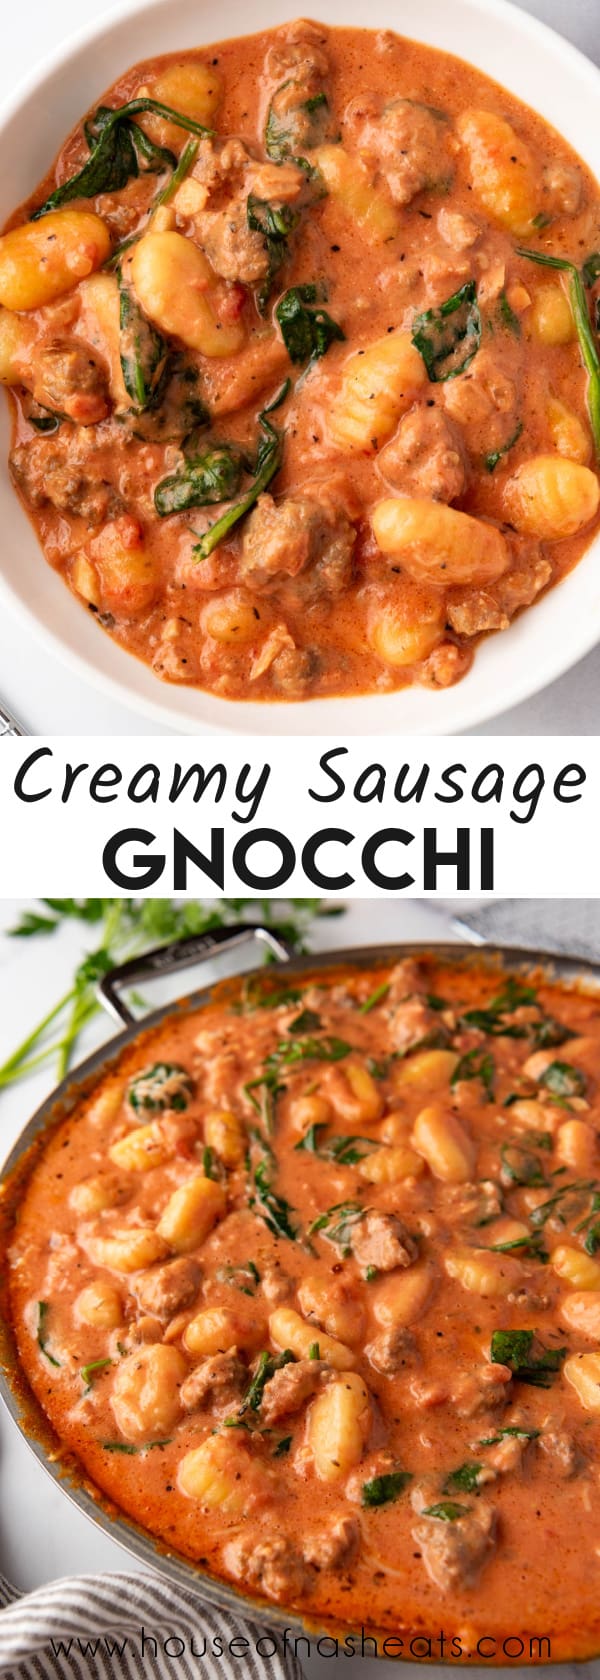 A collage of images of sausage gnocchi with text overlay.